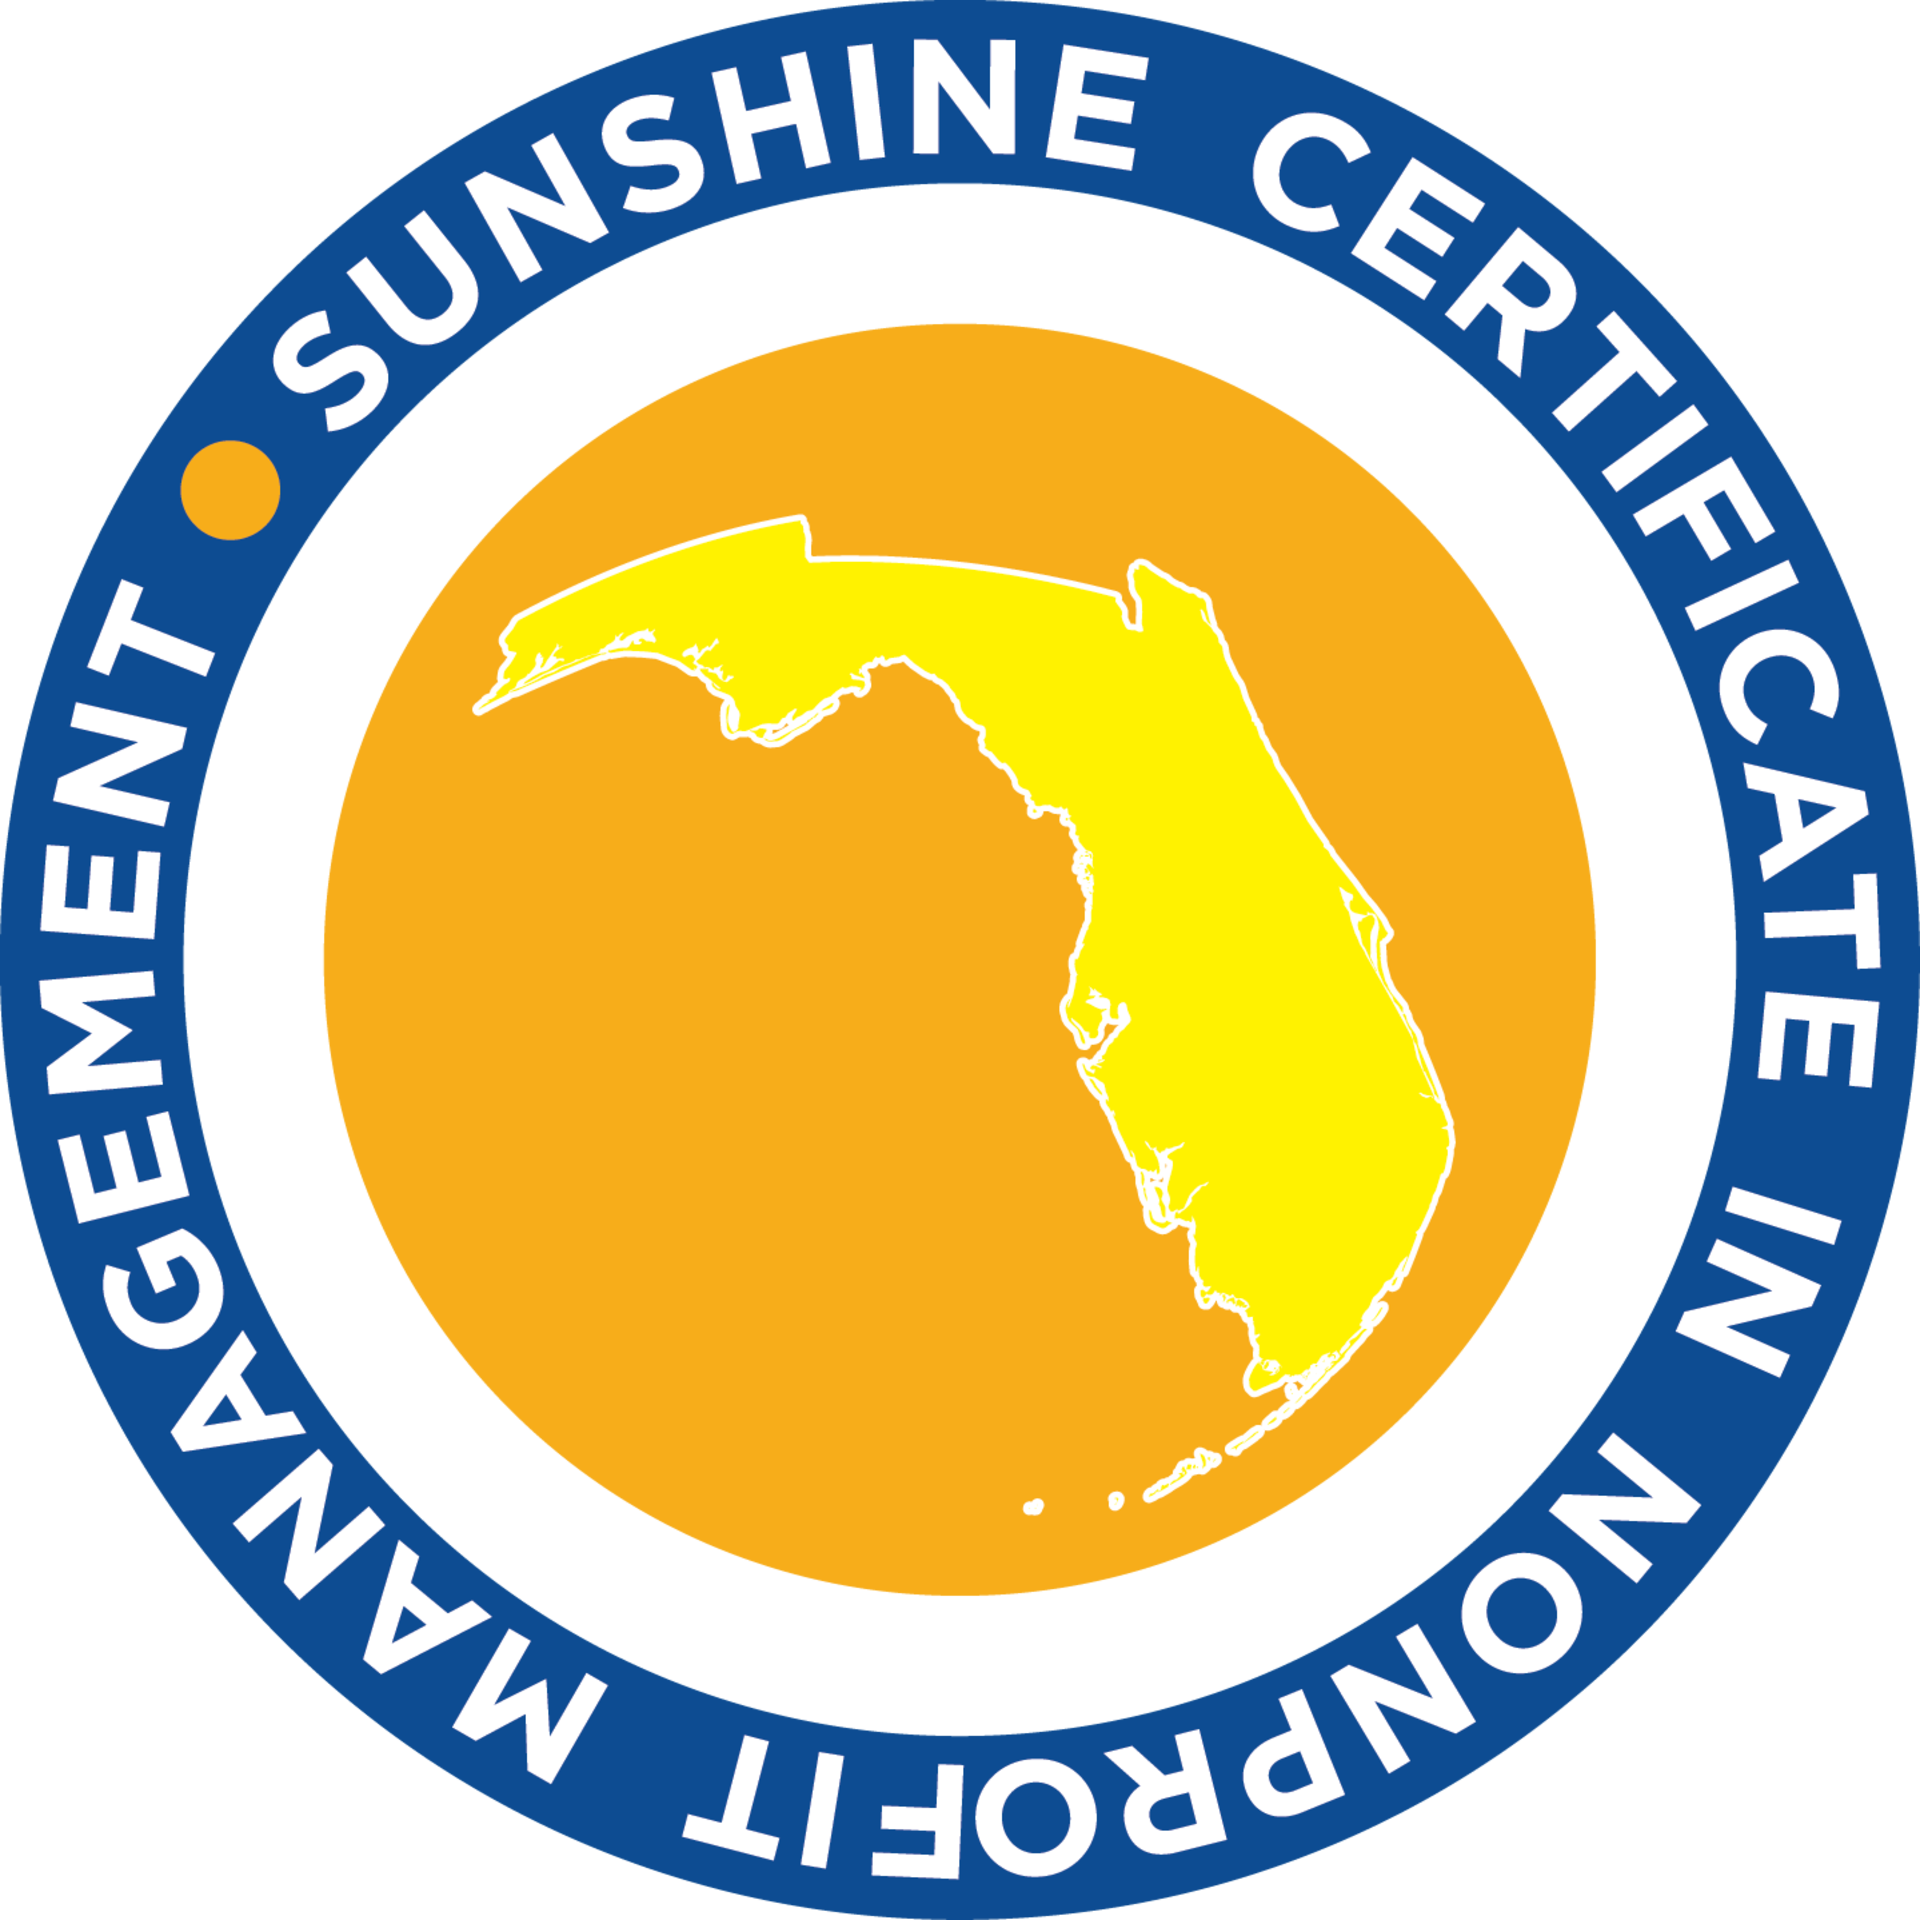  Florida Nonprofits’ Fundraising Class of the Sunshine Certificate in...